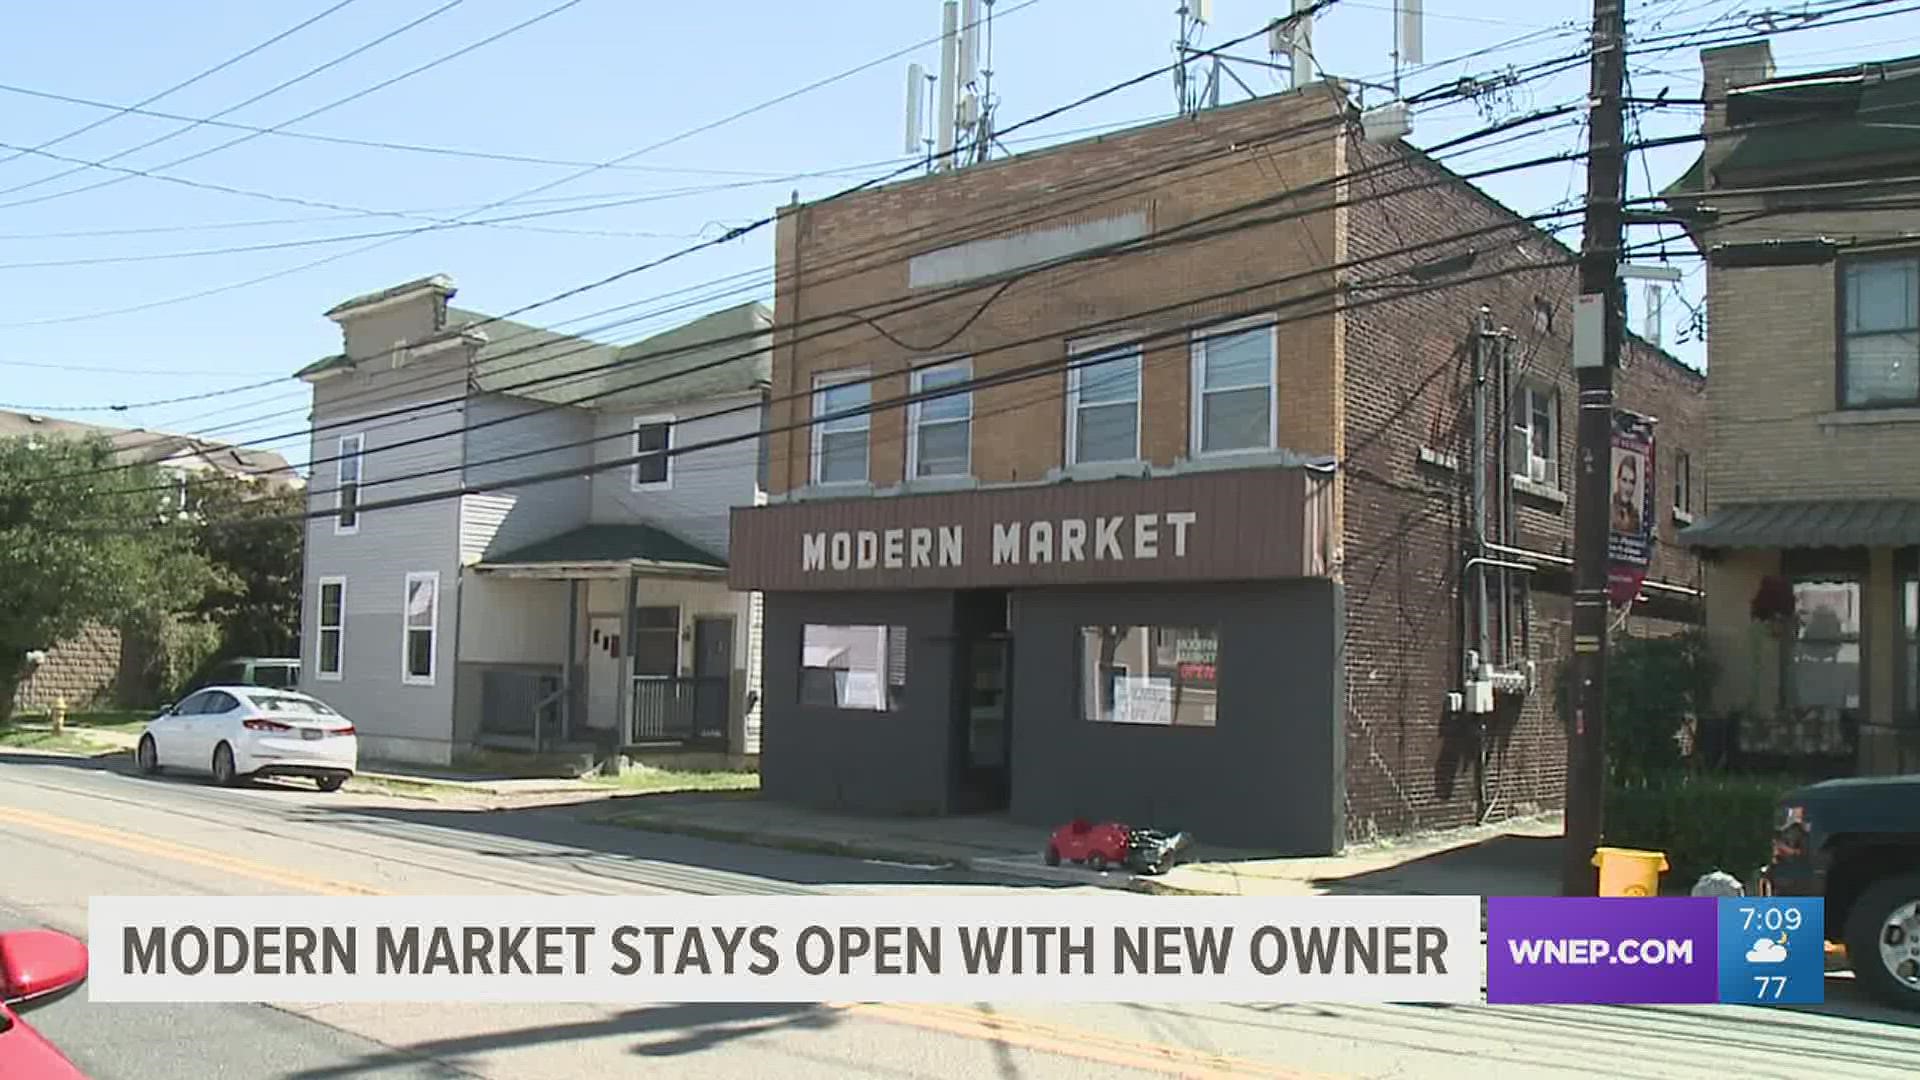 The staple in Luzerne County that many feared would close for good, has found a new owner and a new beginning.